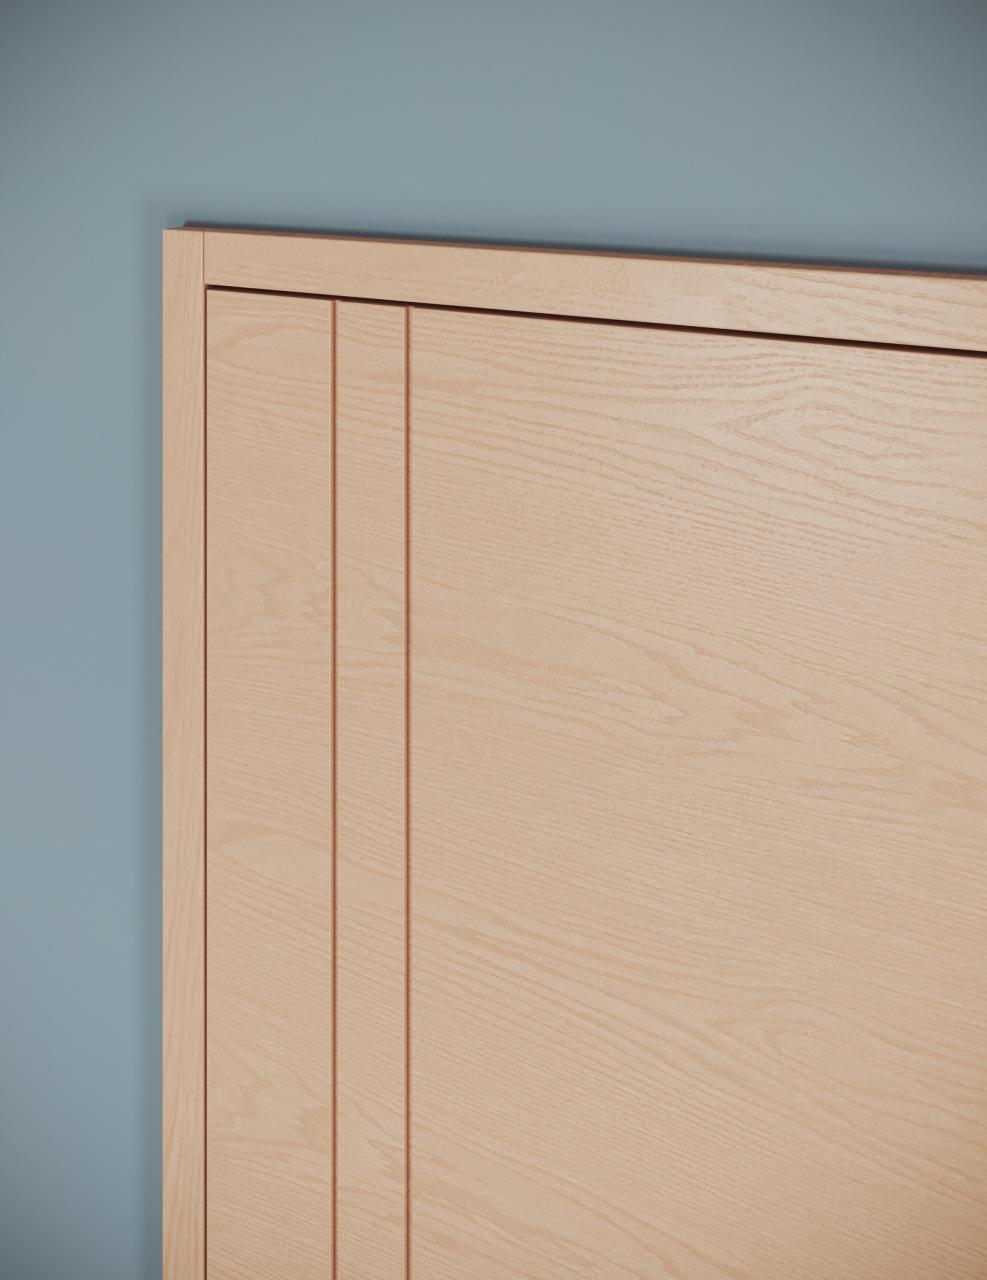 TMIR1014 in plain sawn white oak with Bleached finish and 1/4” kerf cut detail with projected jamb and door